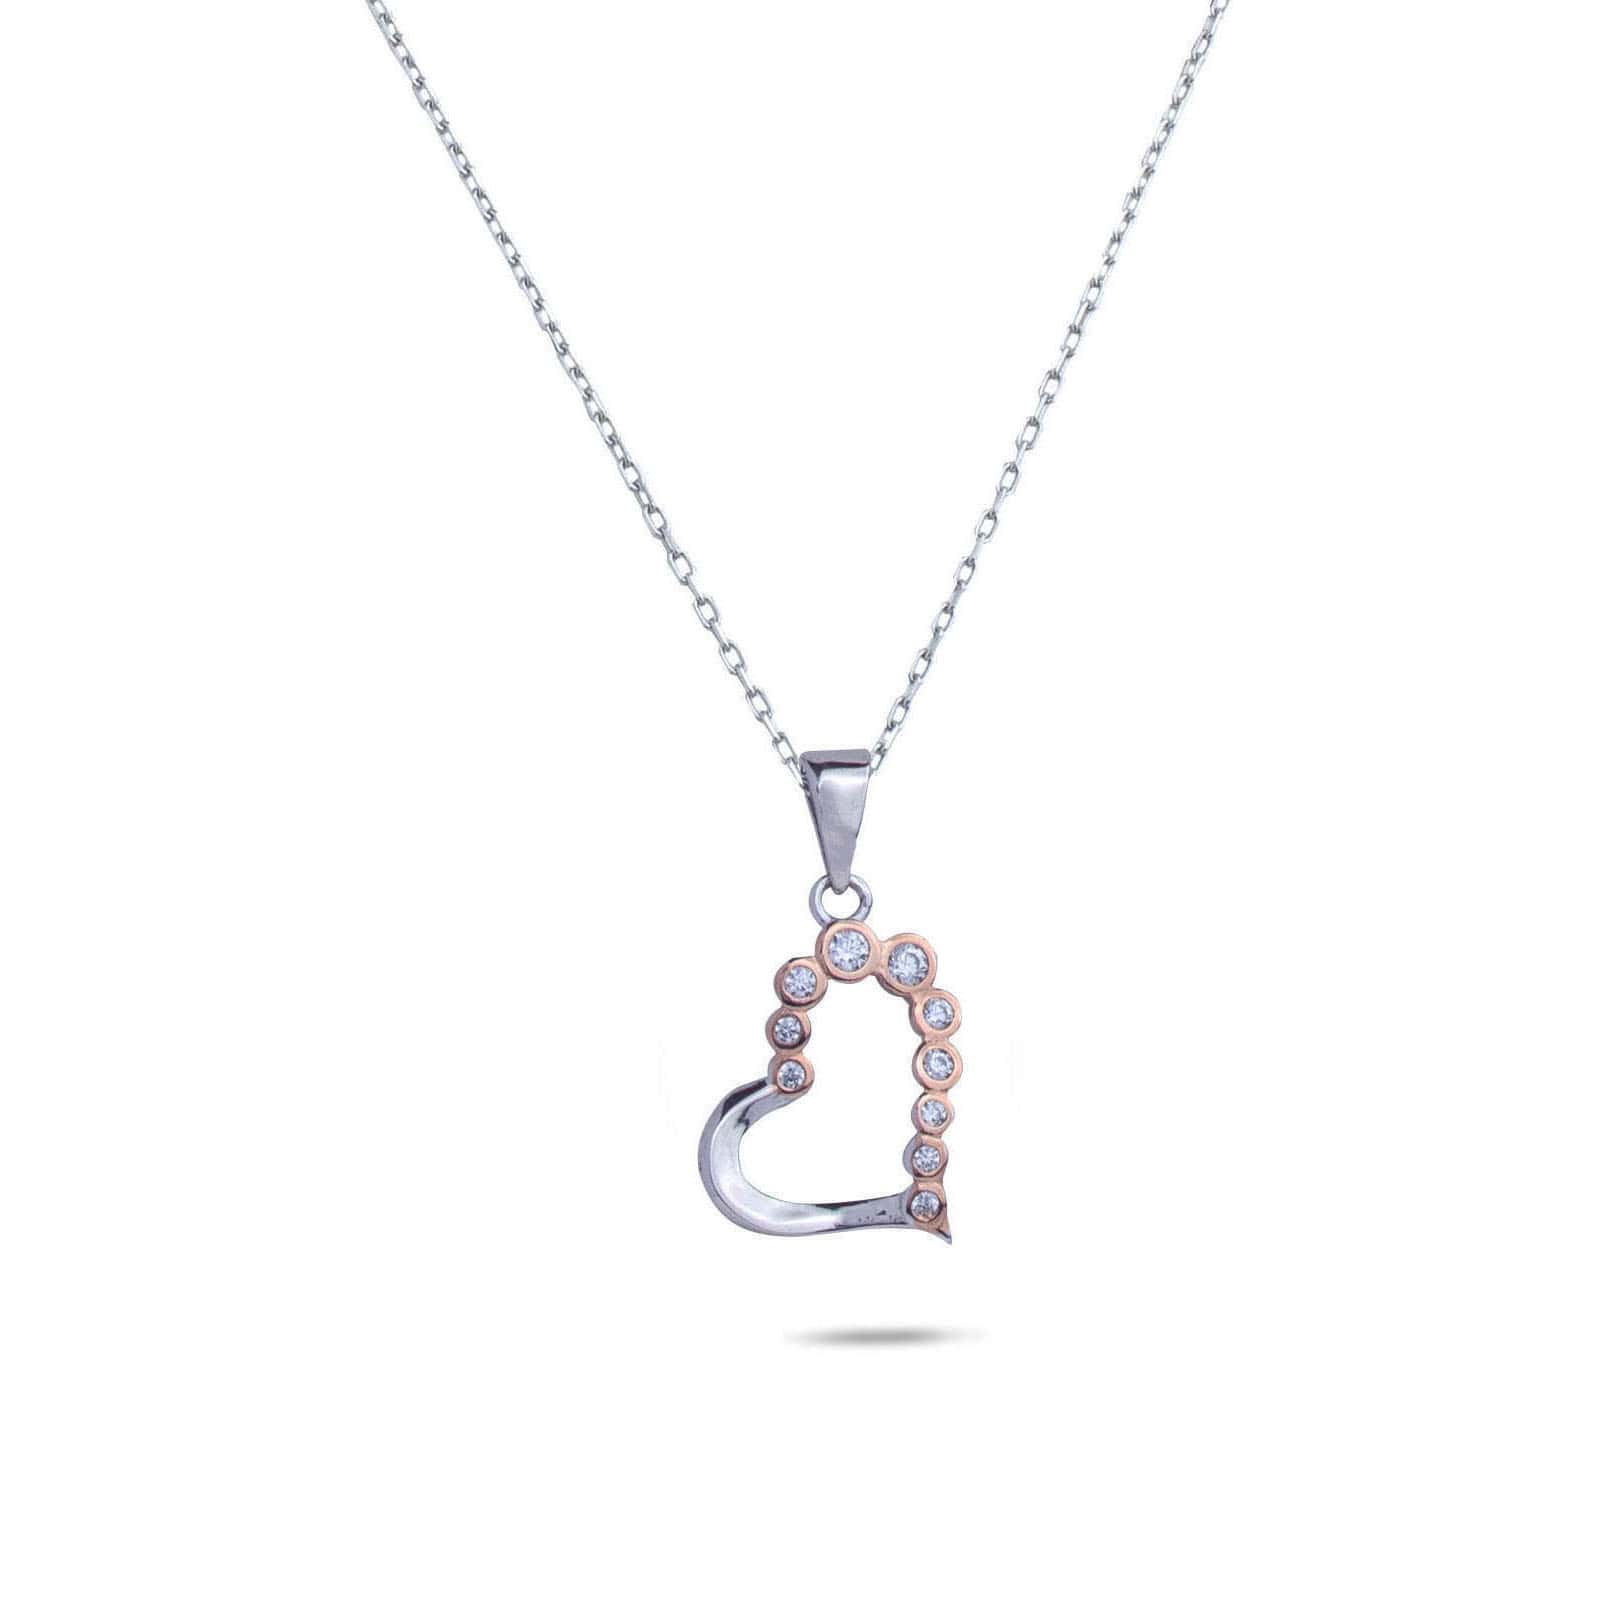 RRJ0852 Pure 925 Sterling Silver Necklace